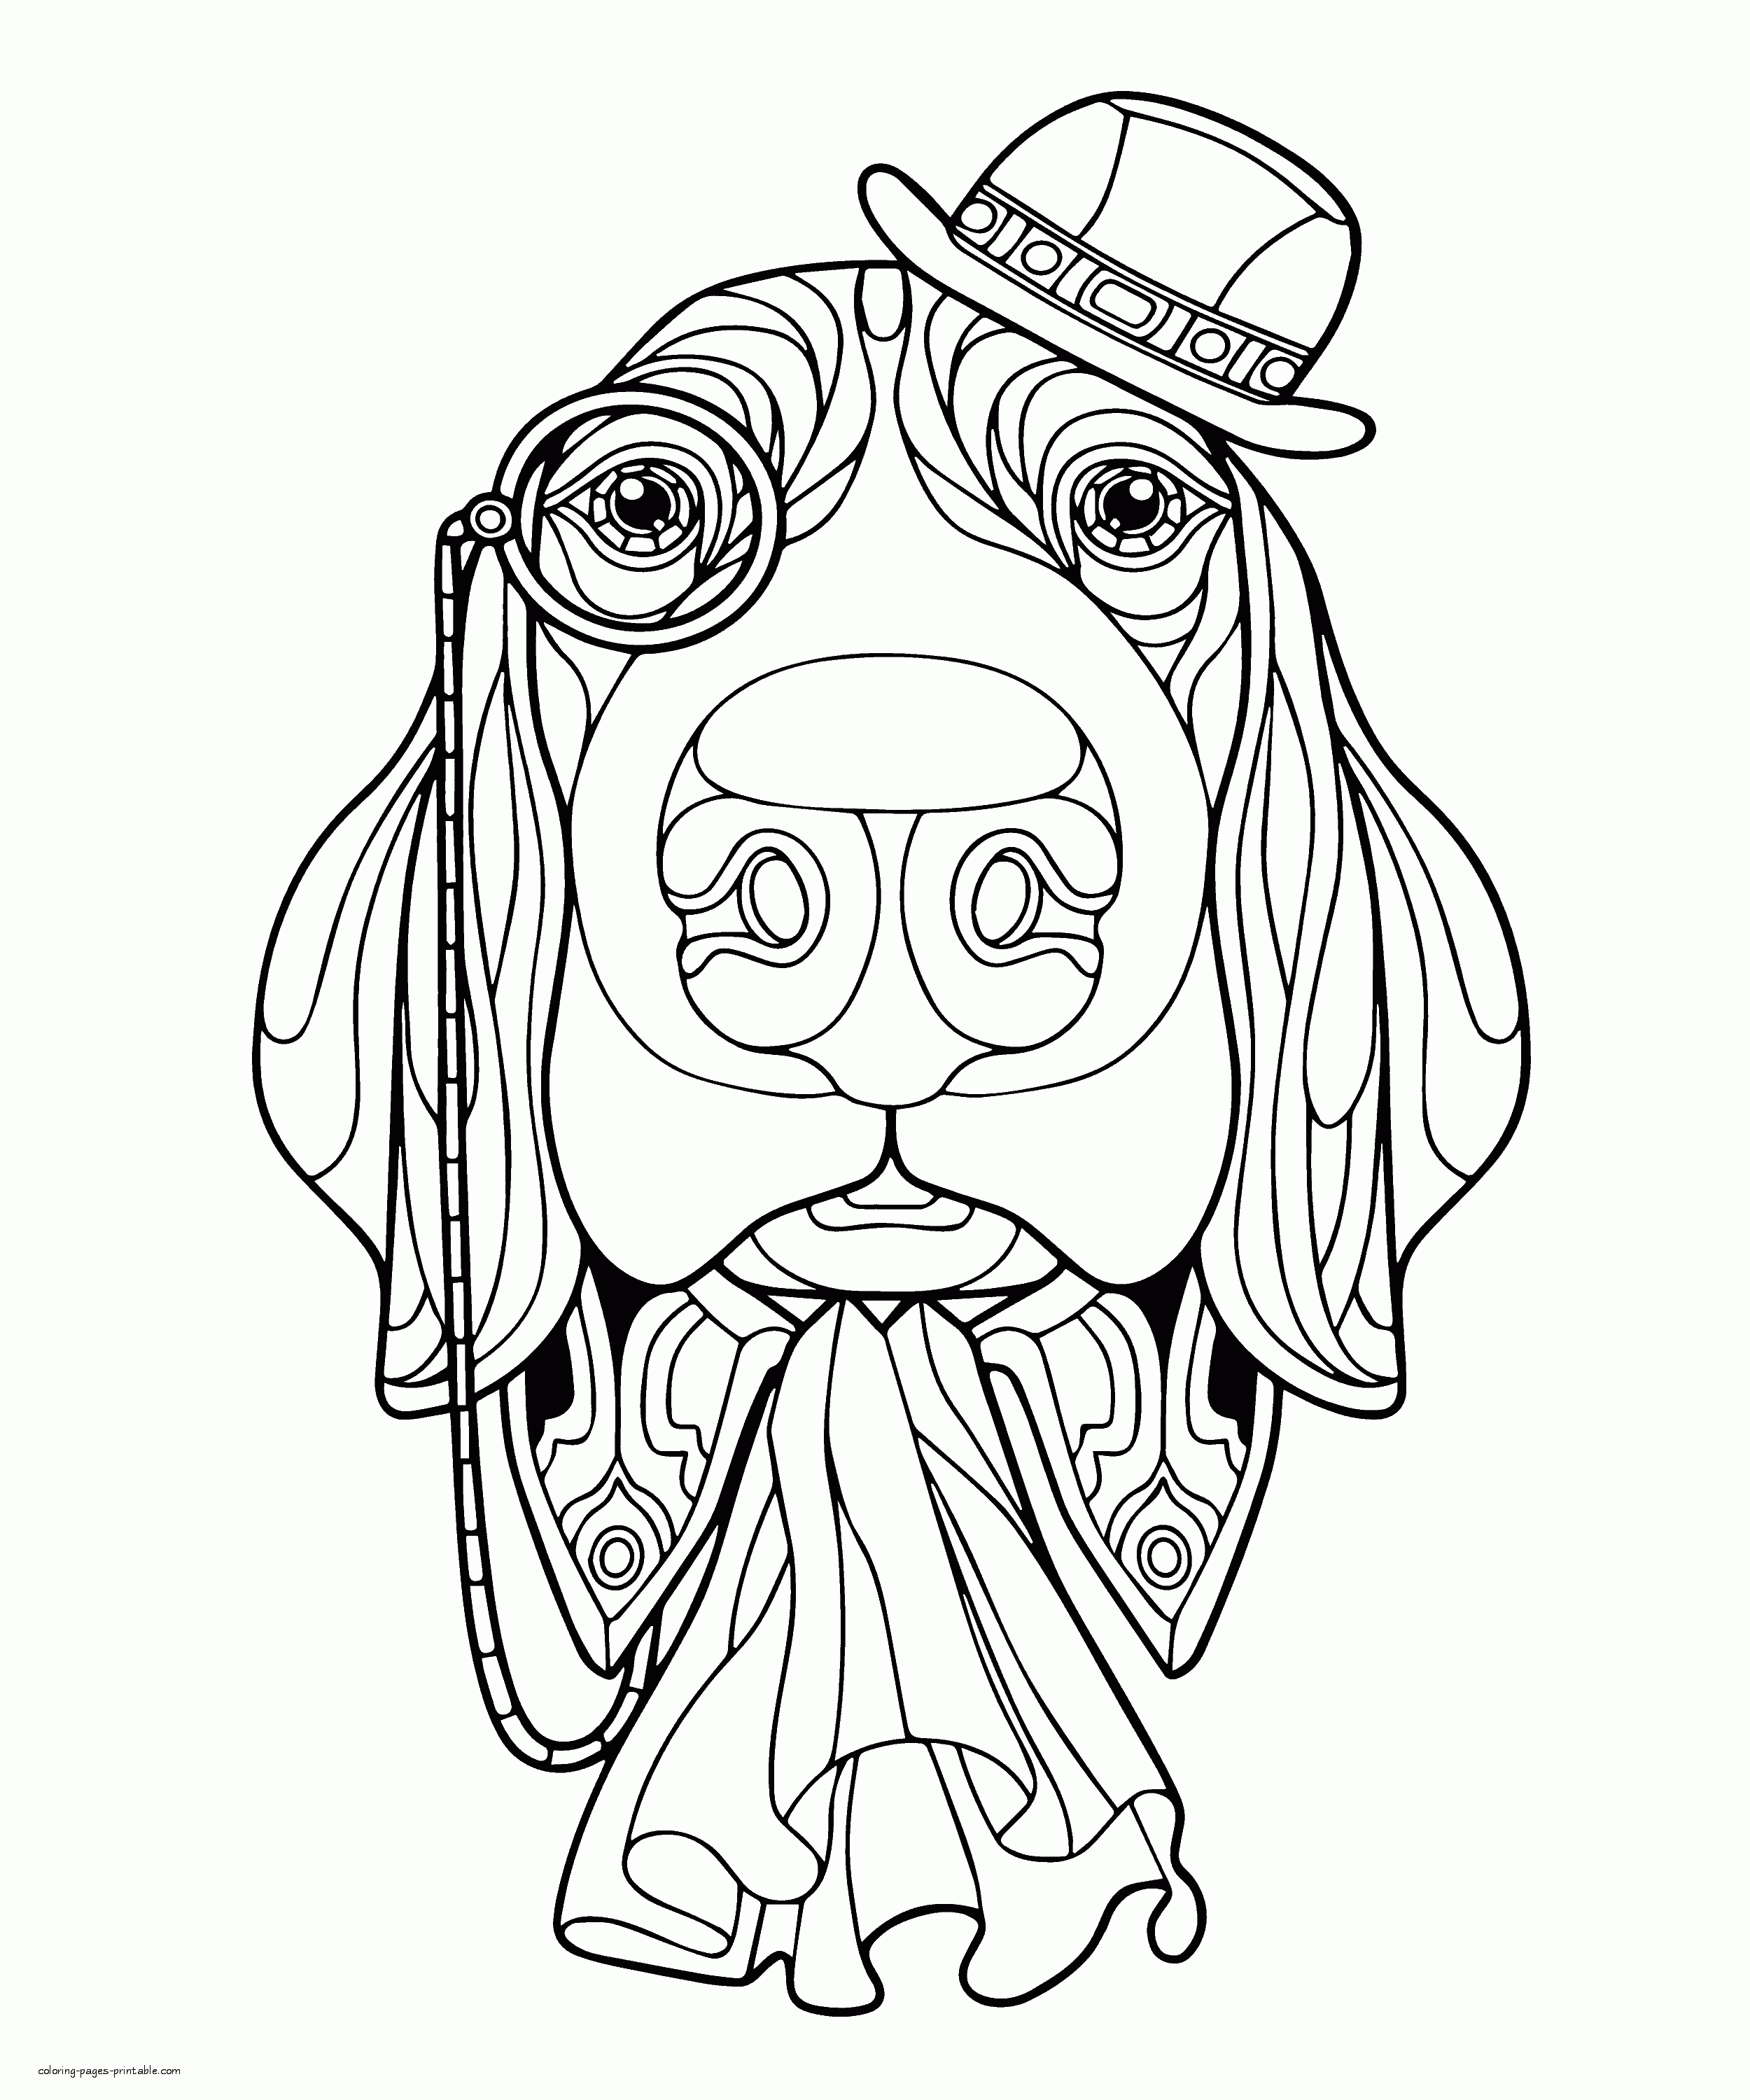 Dog Coloring Pages To Print For Adult || COLORING-PAGES-PRINTABLE.COM